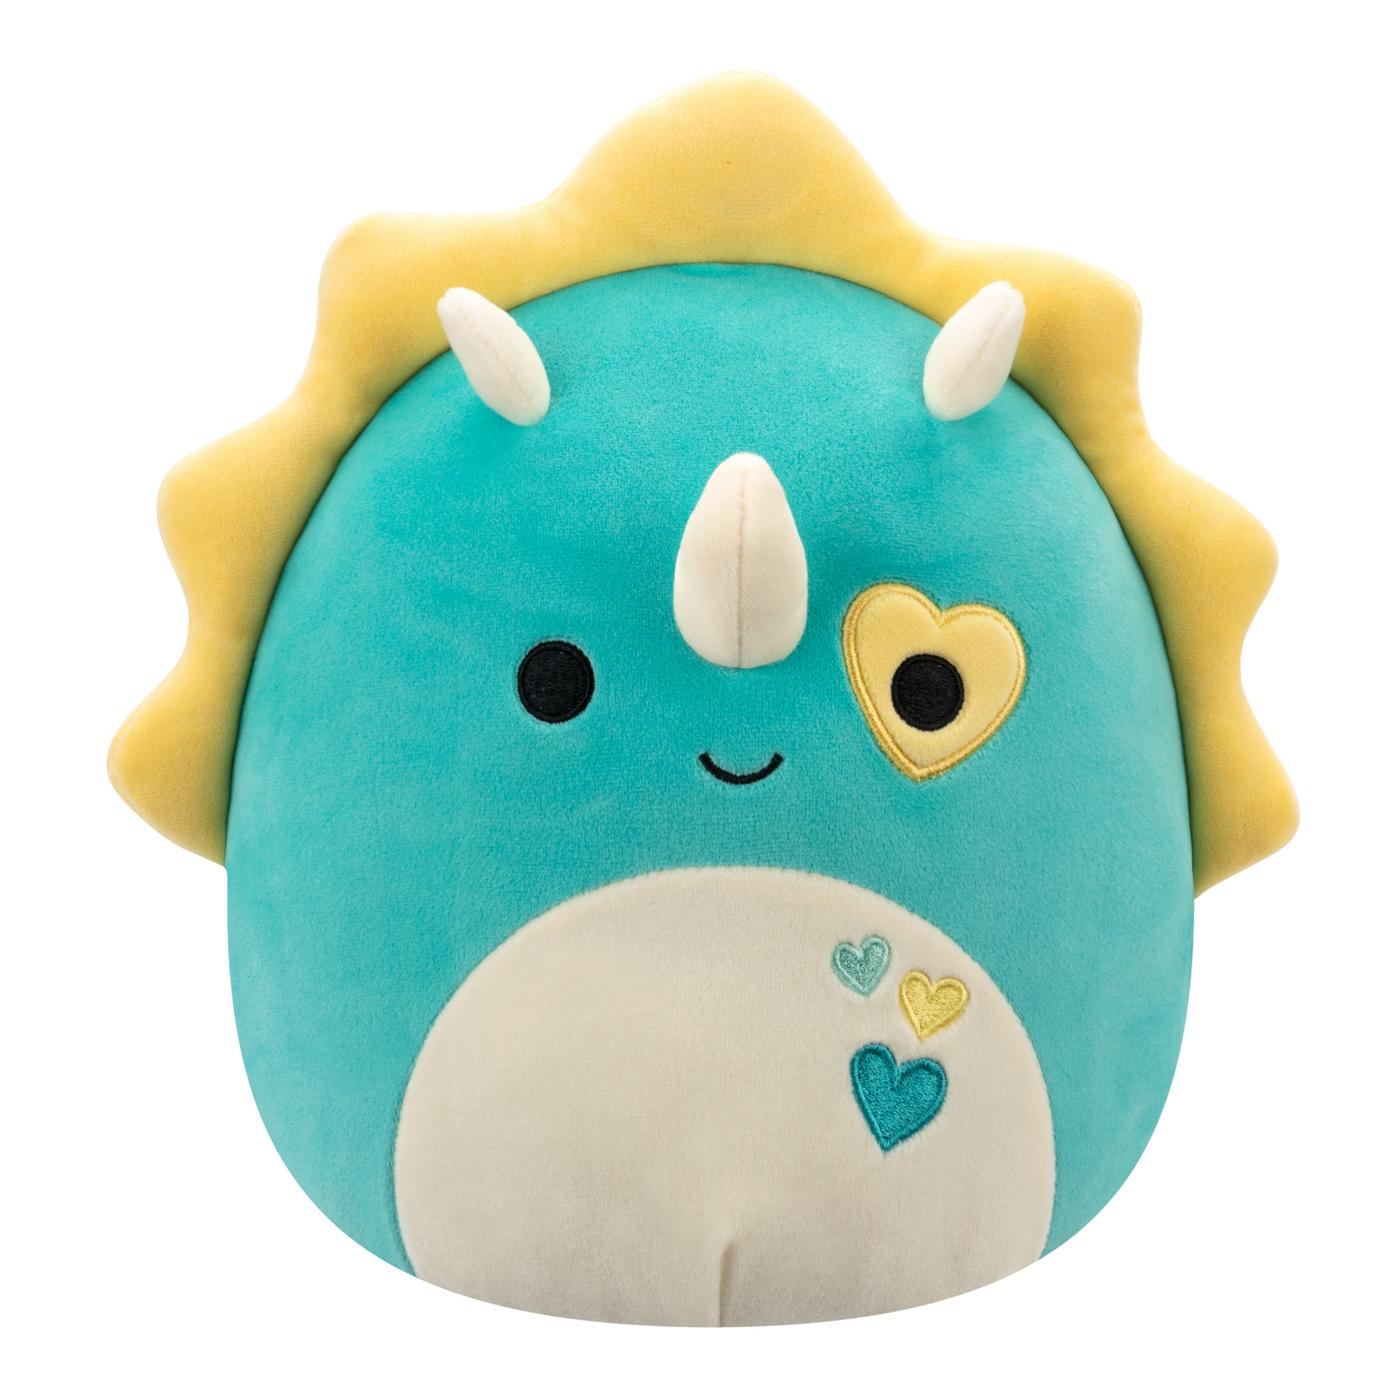 Squishmallows Braedon the Teal Triceratops Valentine's Plush; image 1 of 3